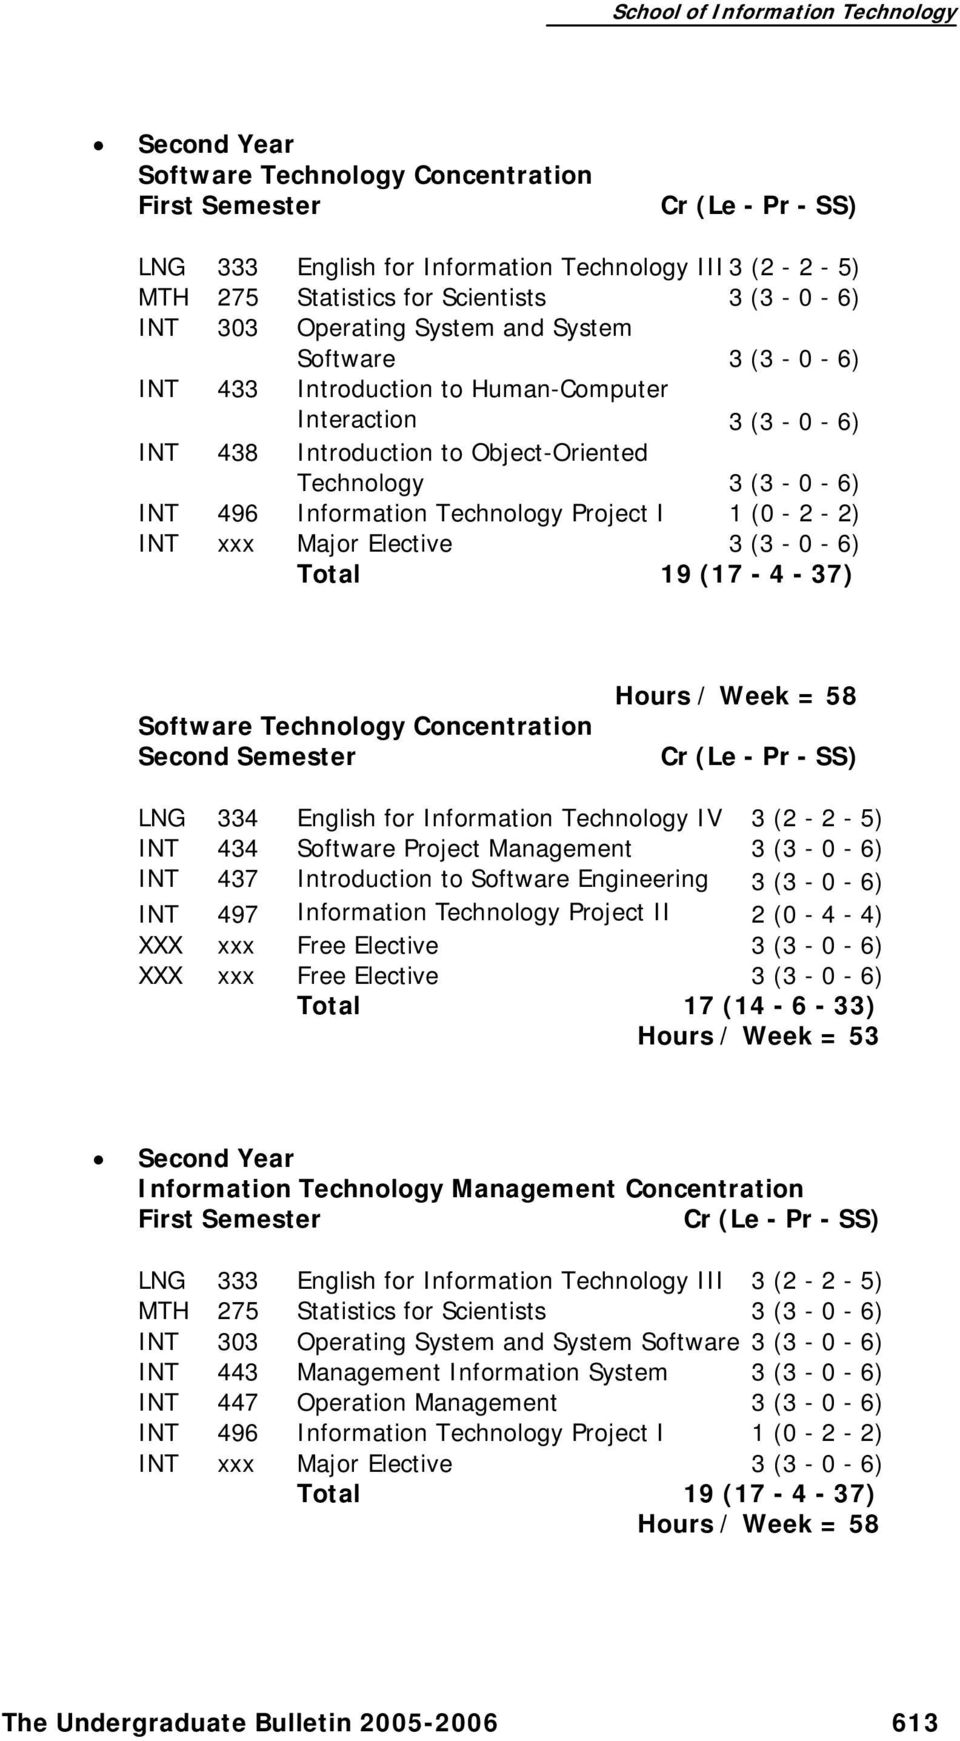 (0-2 - 2) INT xxx Major Elective 3 (3-0 - 6) Total 19 (17-4 - 37) Software Technology Concentration Second Semester Hours / Week = 58 LNG 334 English for Information Technology IV 3 (2-2 - 5) INT 434